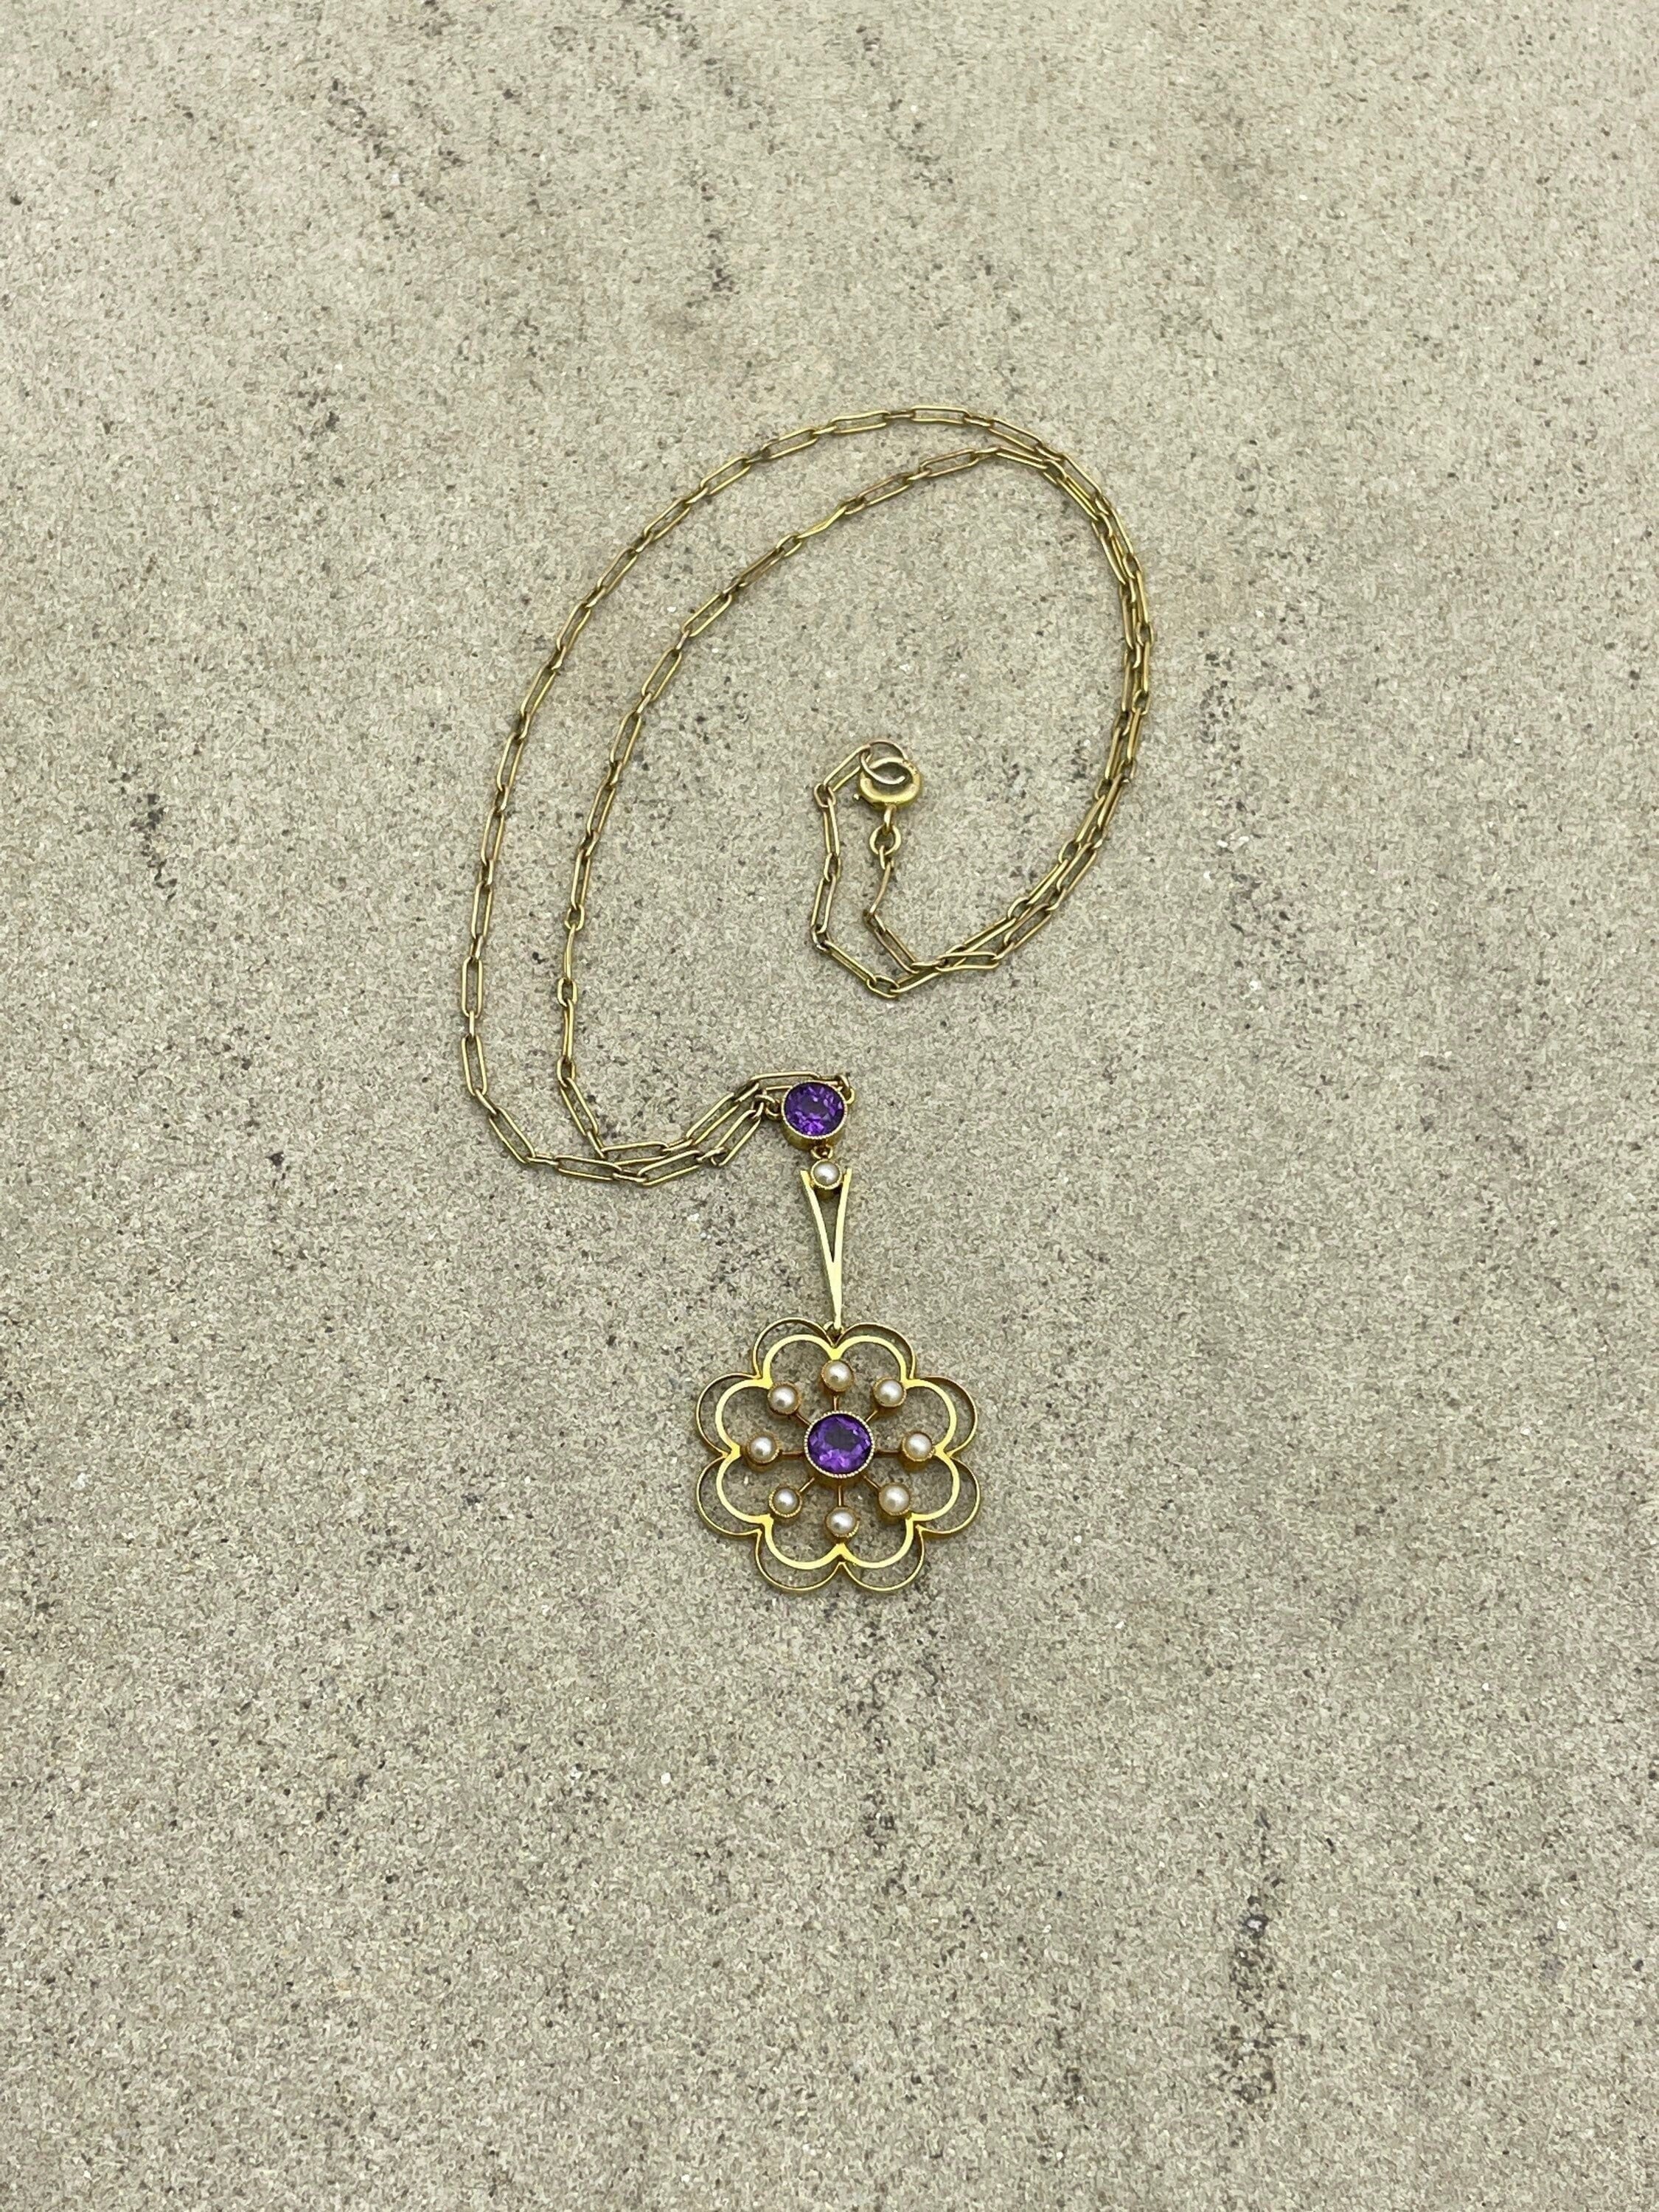 Edwardian 15ct gold, amethyst & seed pearl drop pendant necklace, fancy 9ct gold trombone link chain